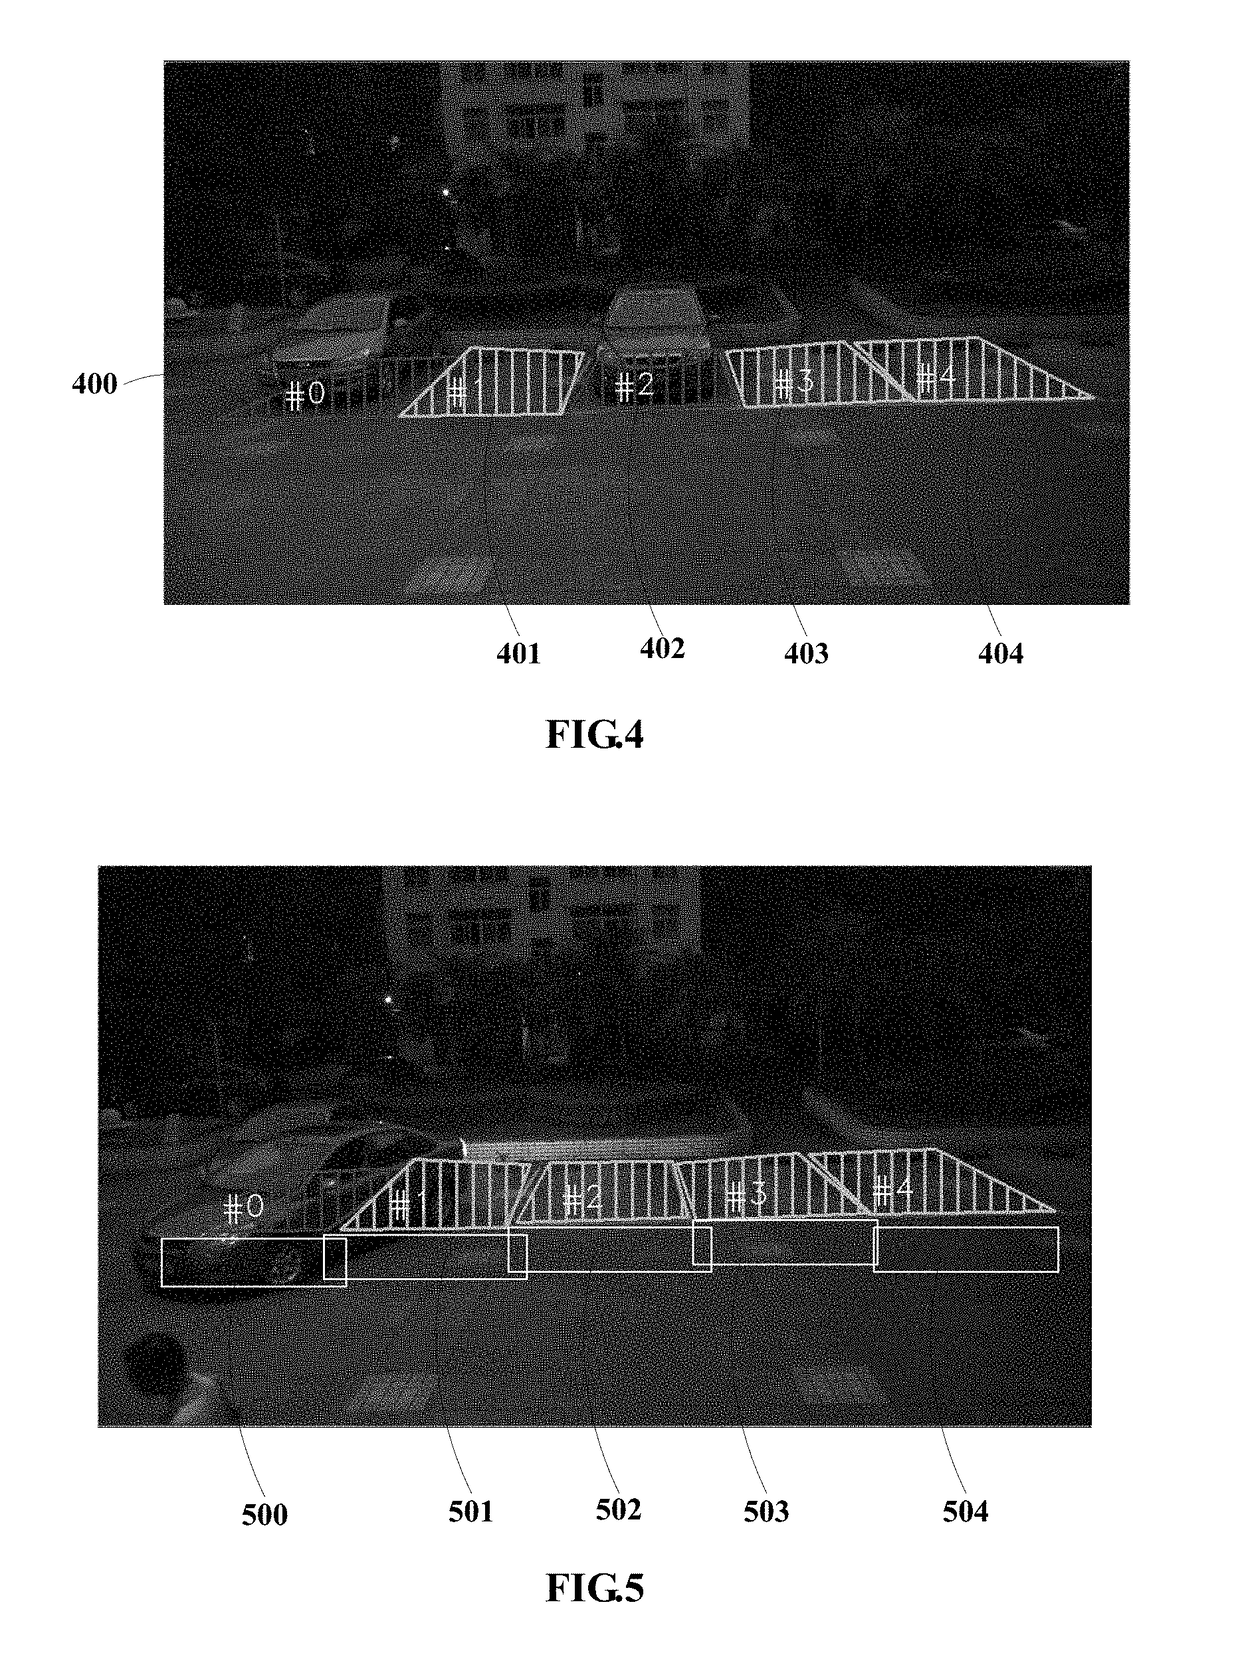 Detection method and apparatus of a status of a parking lot and electronic equipment